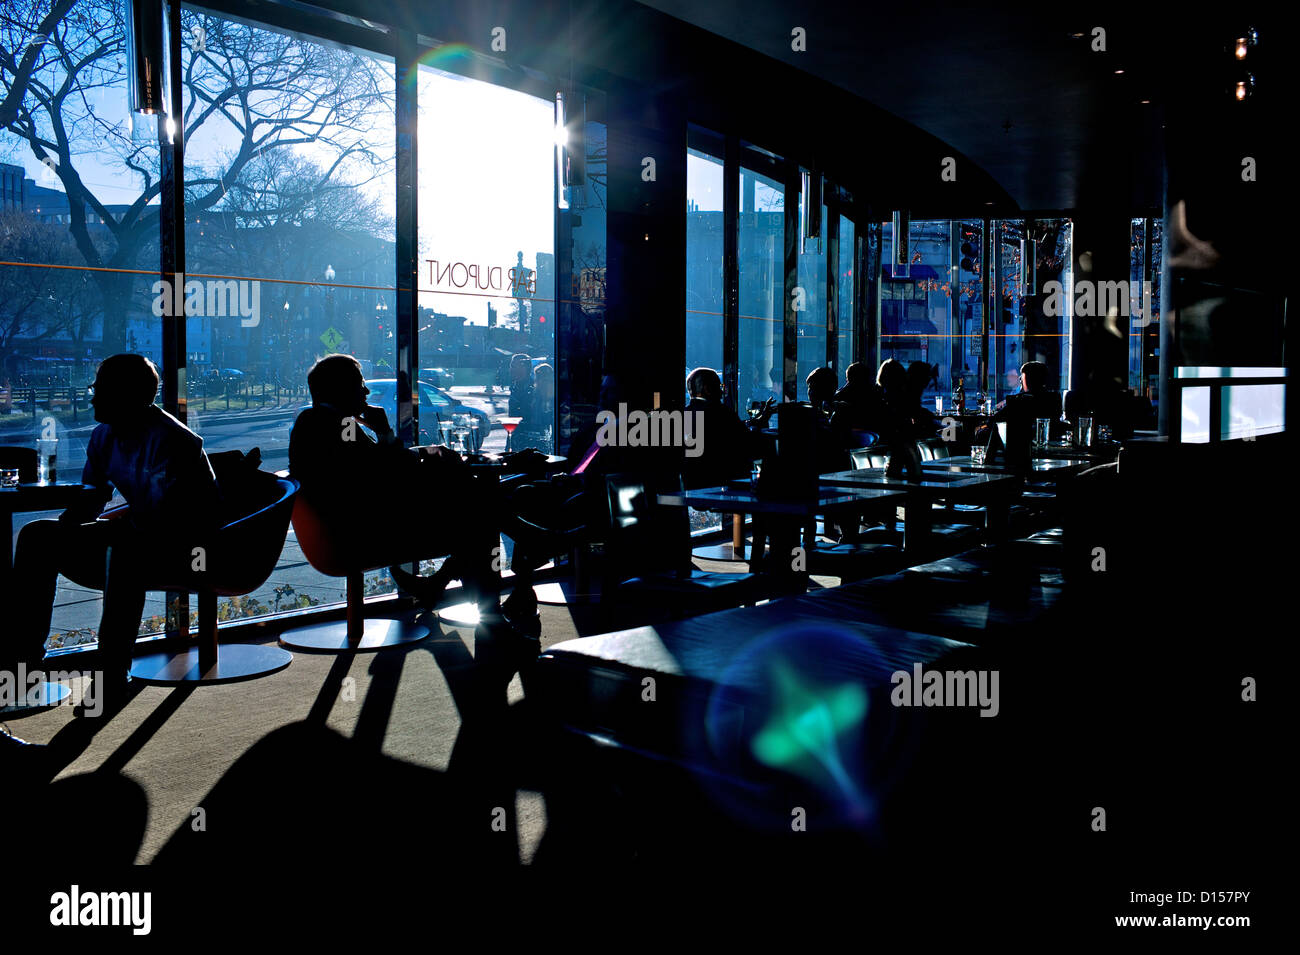 Silhouettes of people sitting in coffee shop. Stock Photo